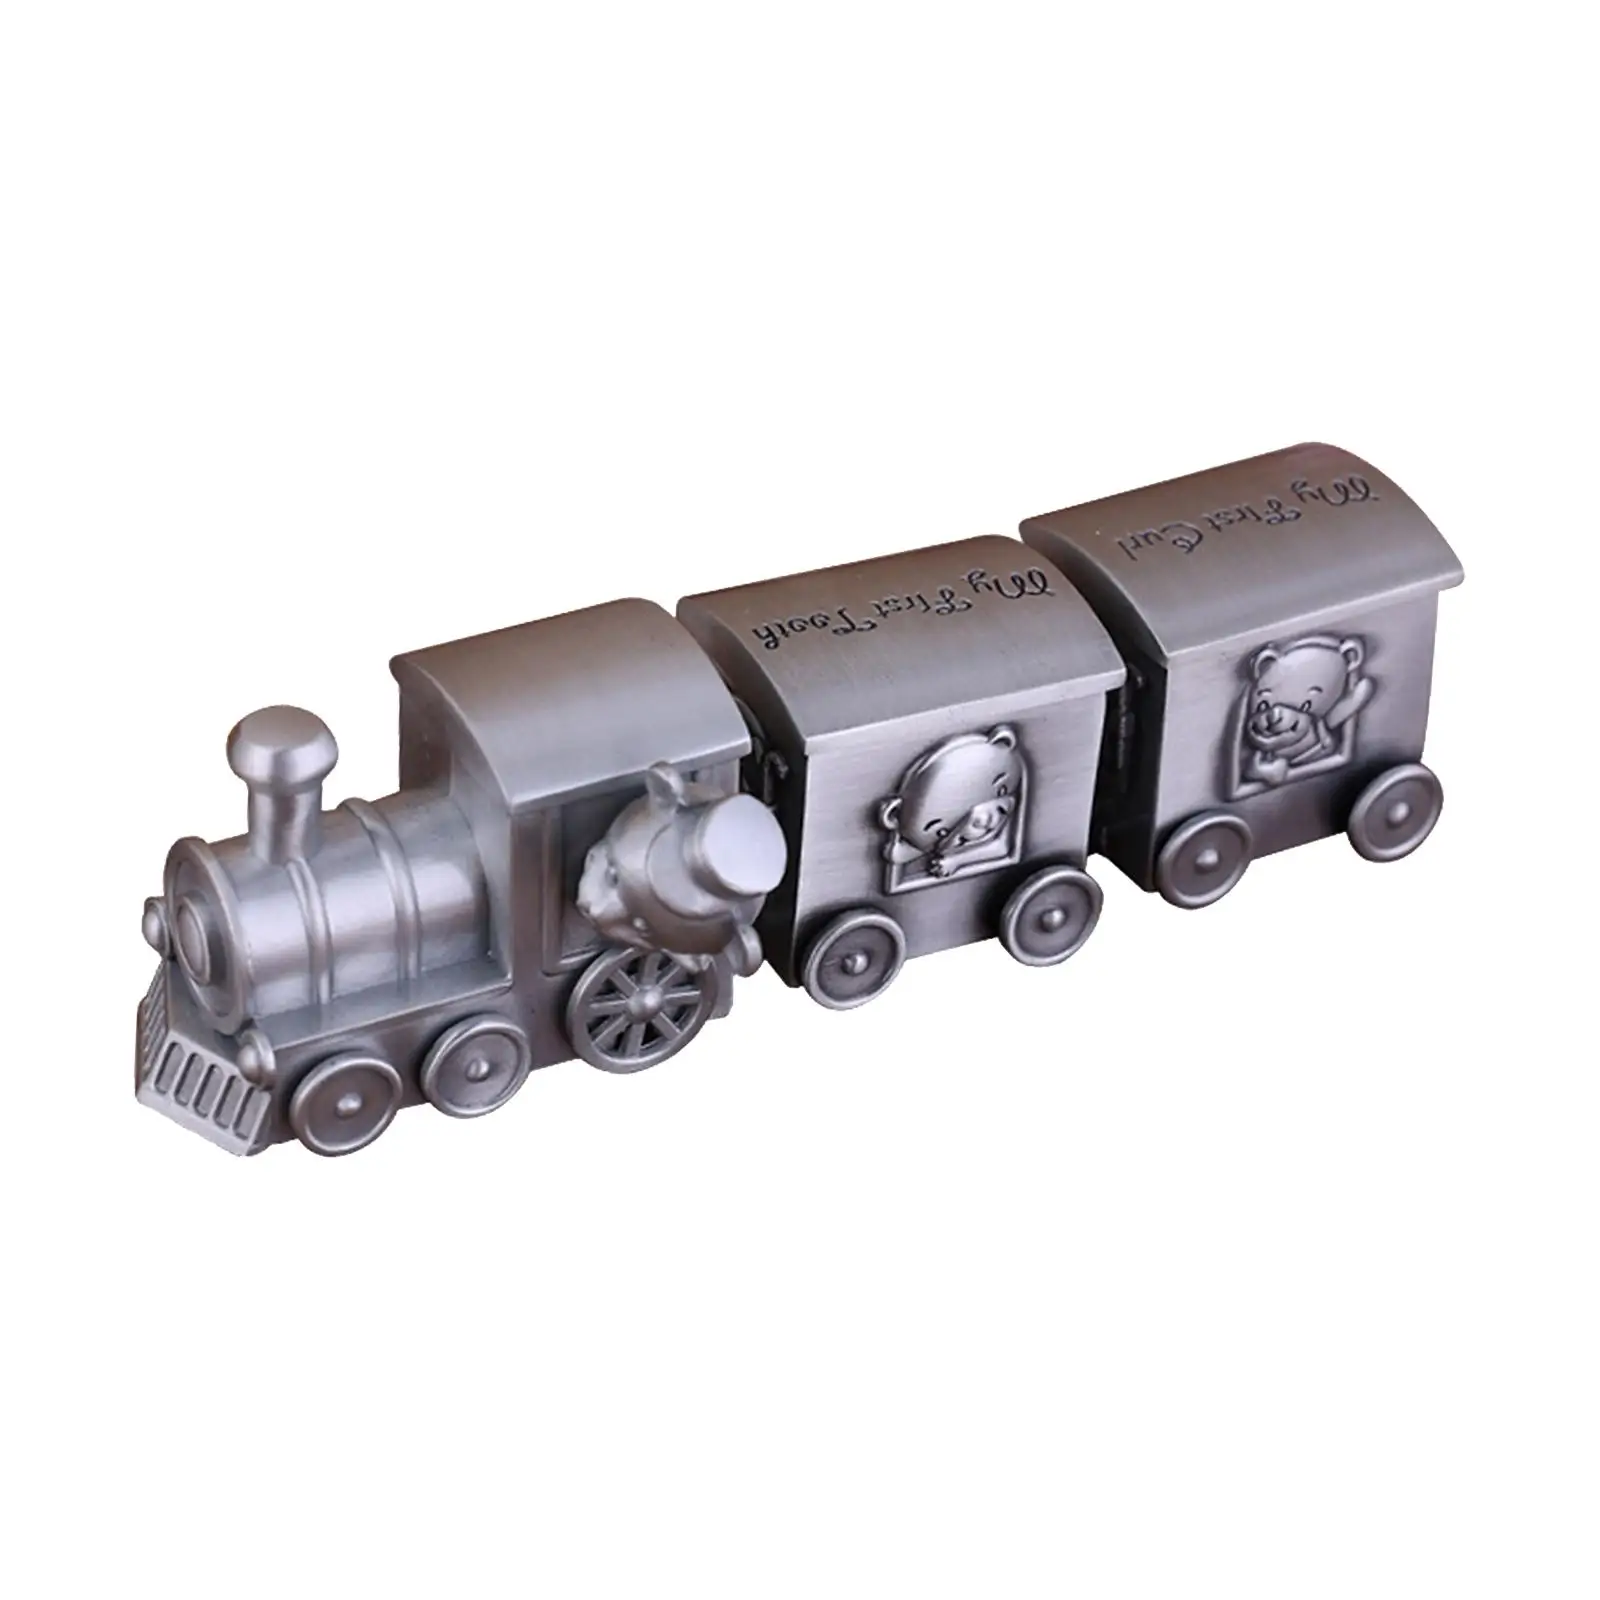 Train Tooth Holder Container Storage Childhood Memory Metal Organizer Baby Tooth Fairy Container for Birthday Gift Baby Shower